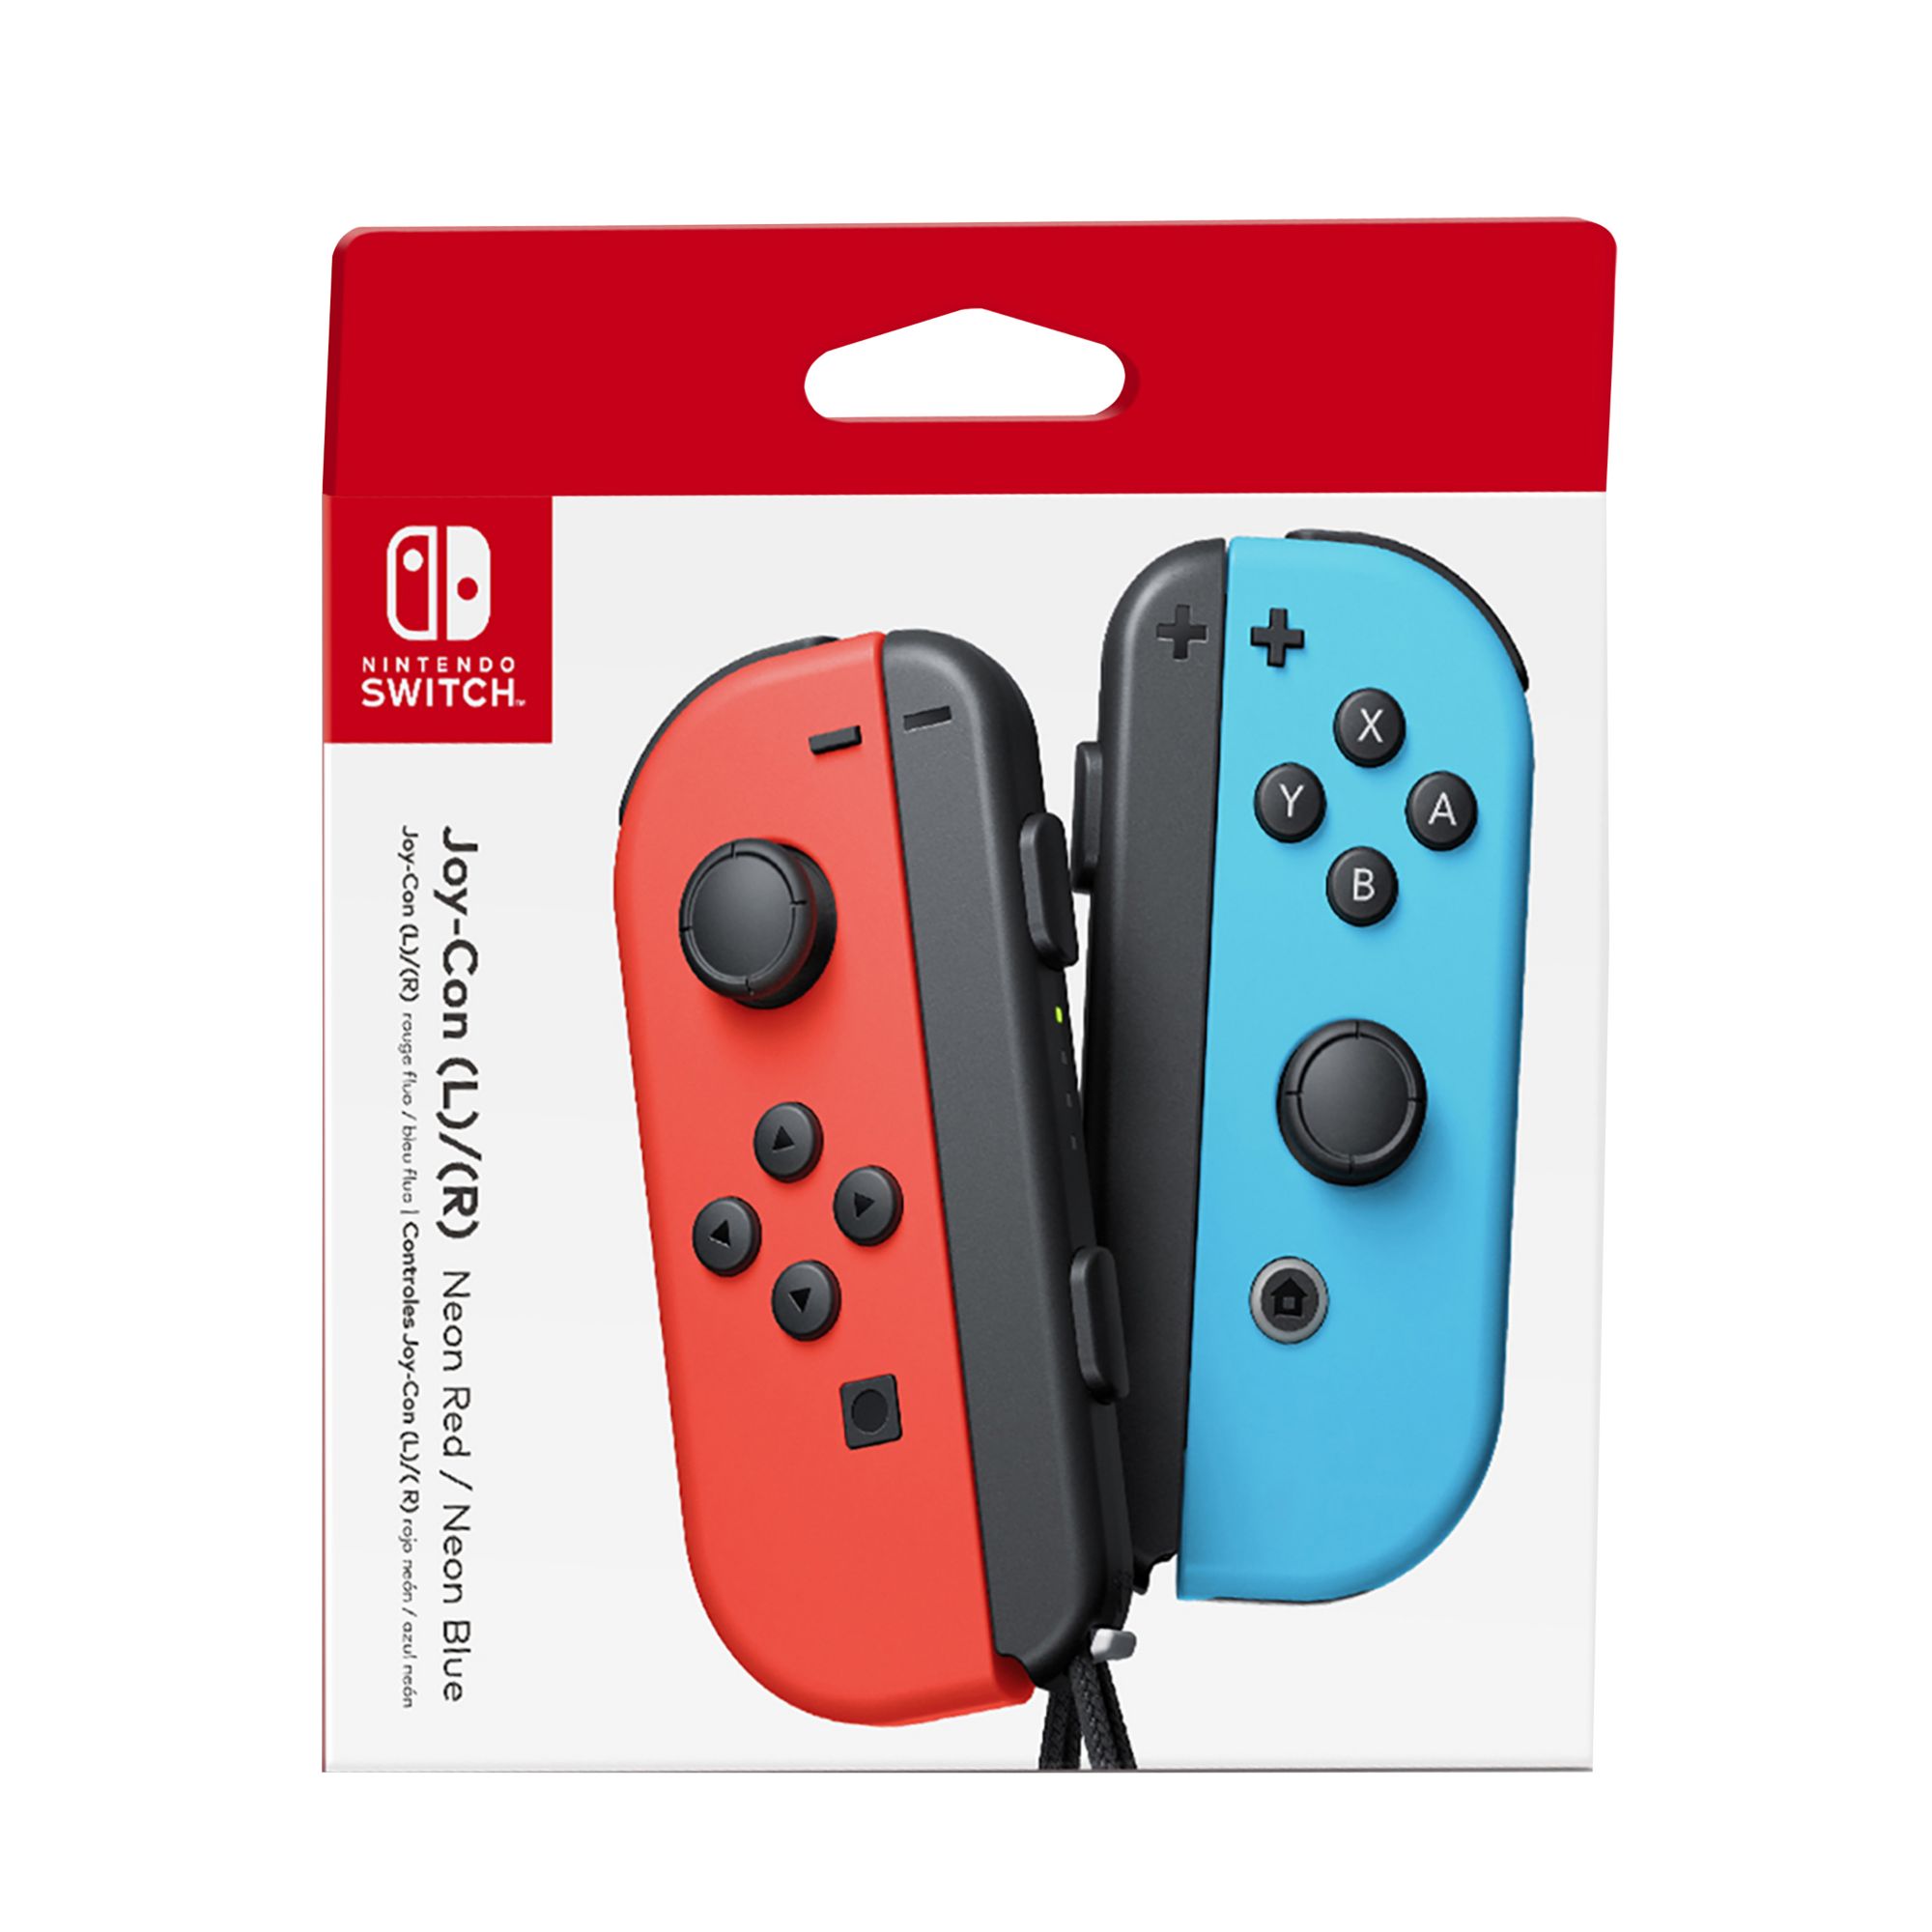 Nintendo Switch Console with Neon Blue/Neon Red Joy-Con Controller